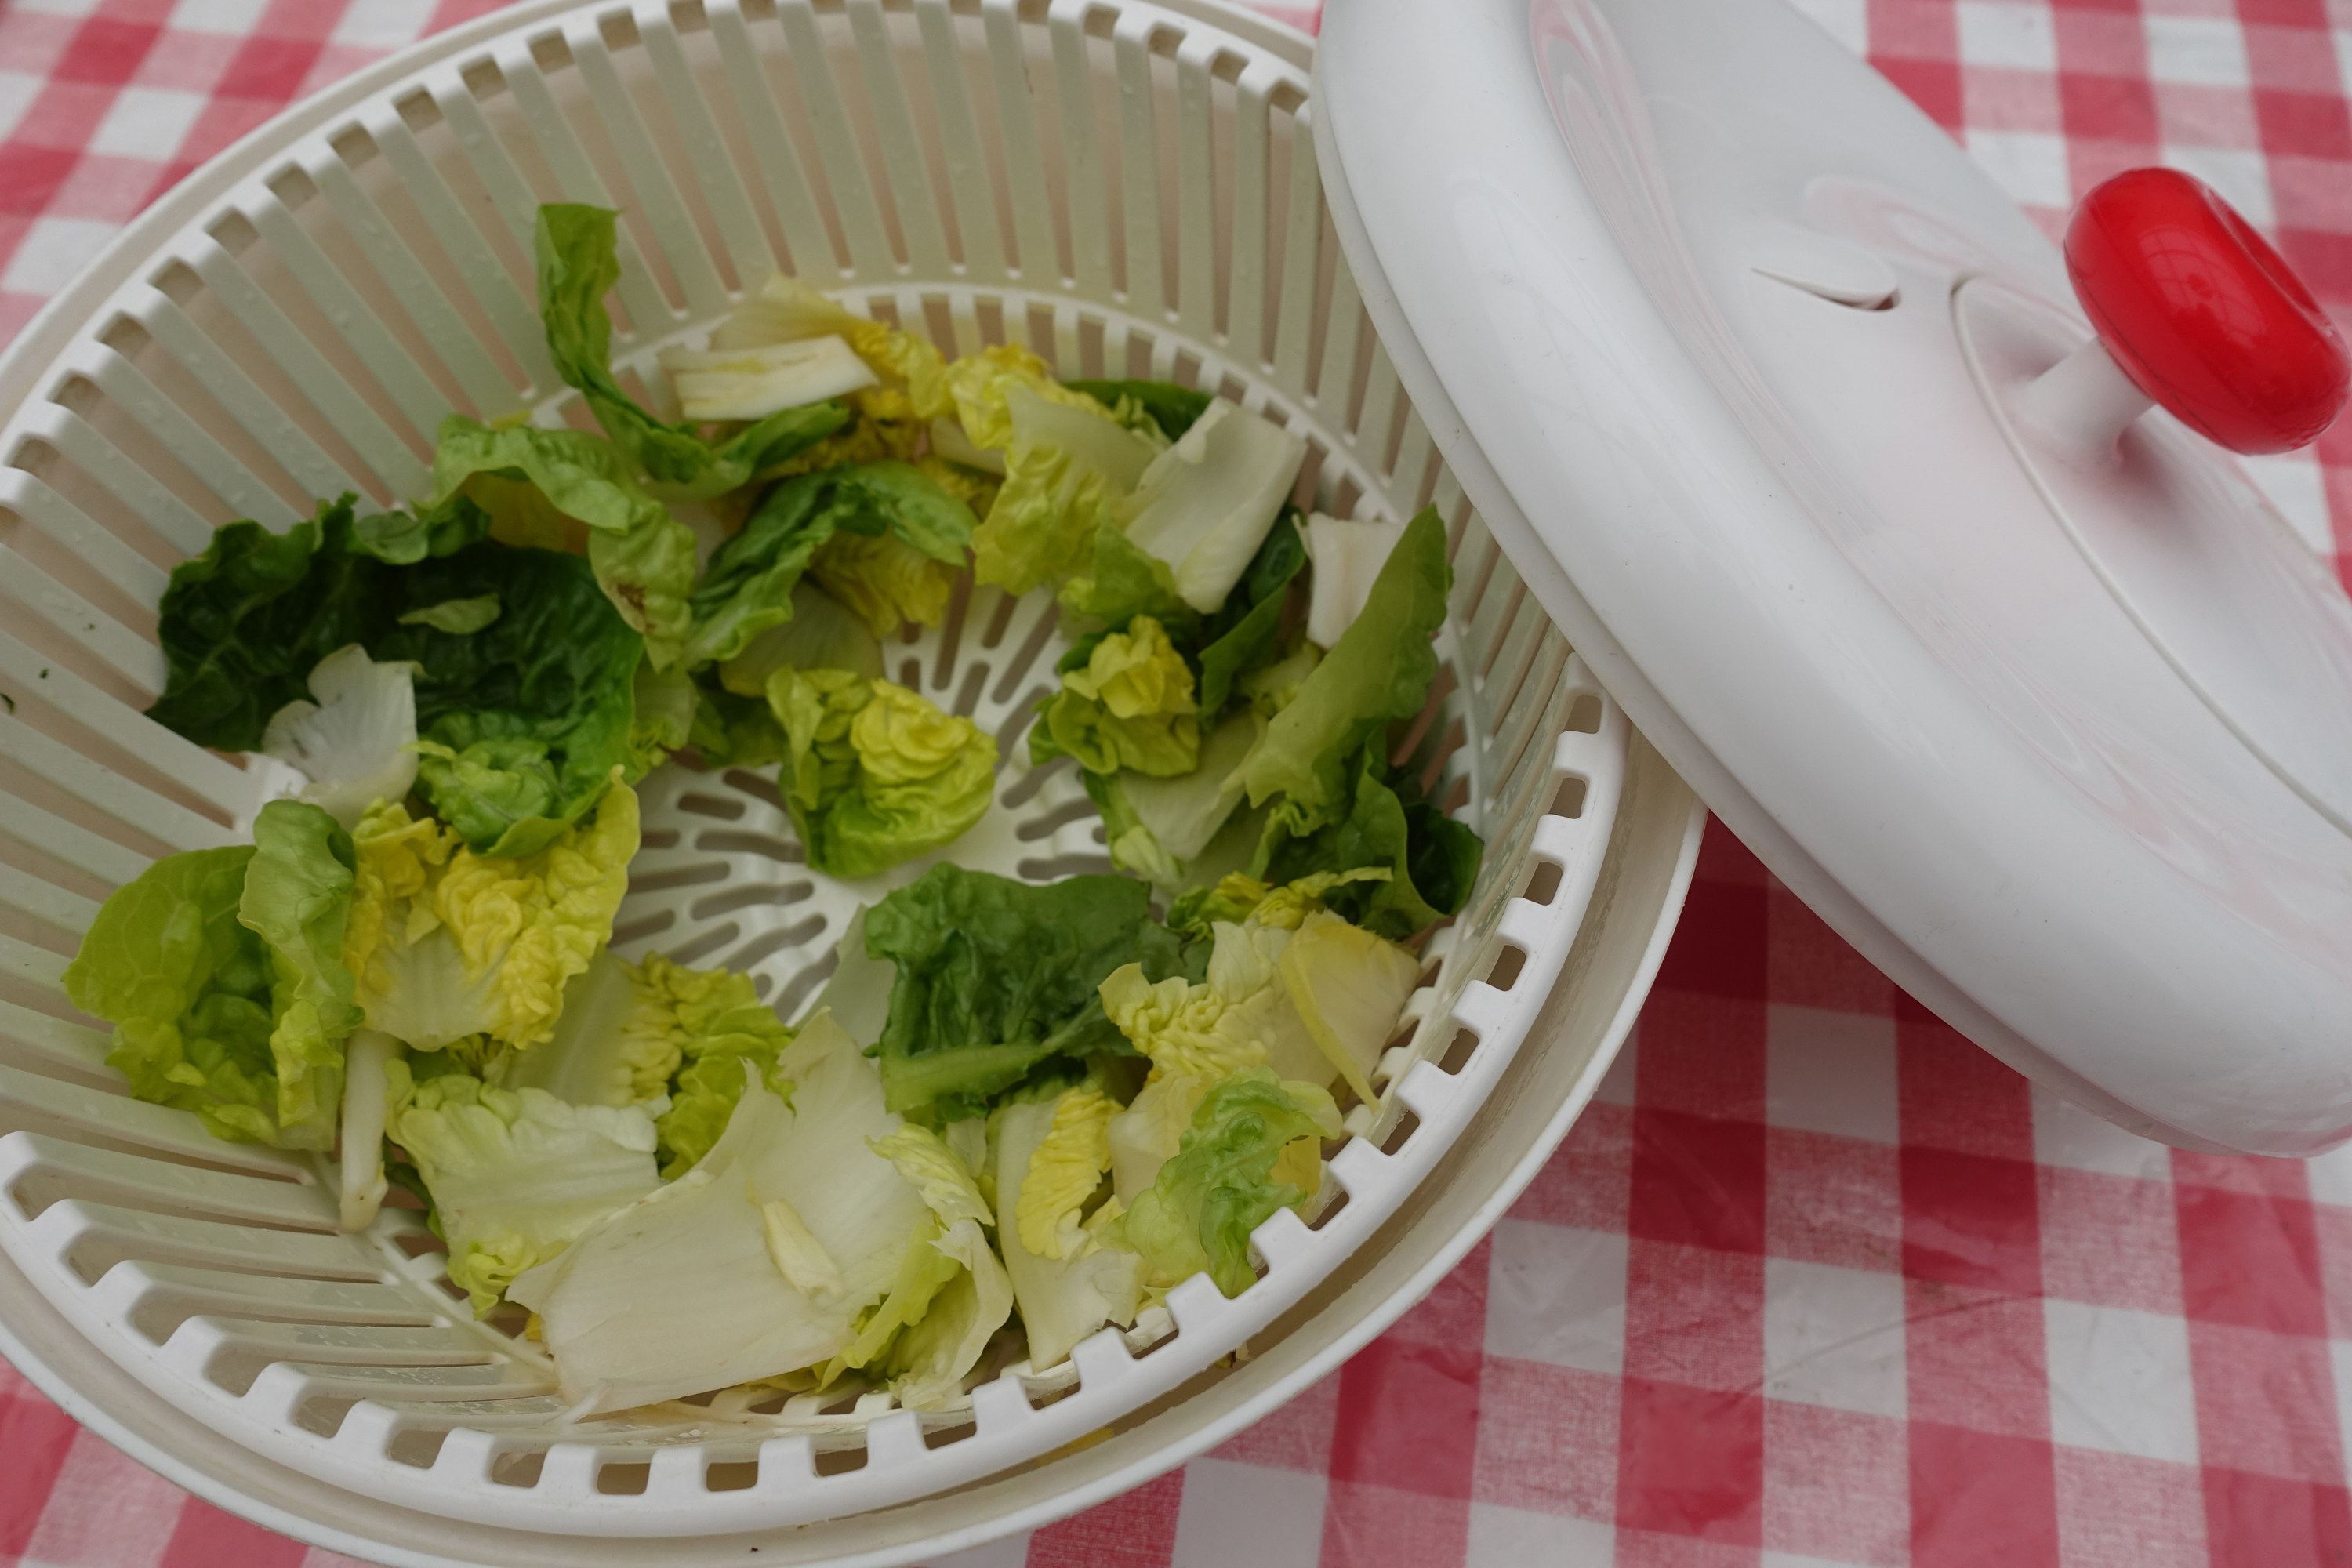 Dry lettuce leaves in the bowl of a salad spinner